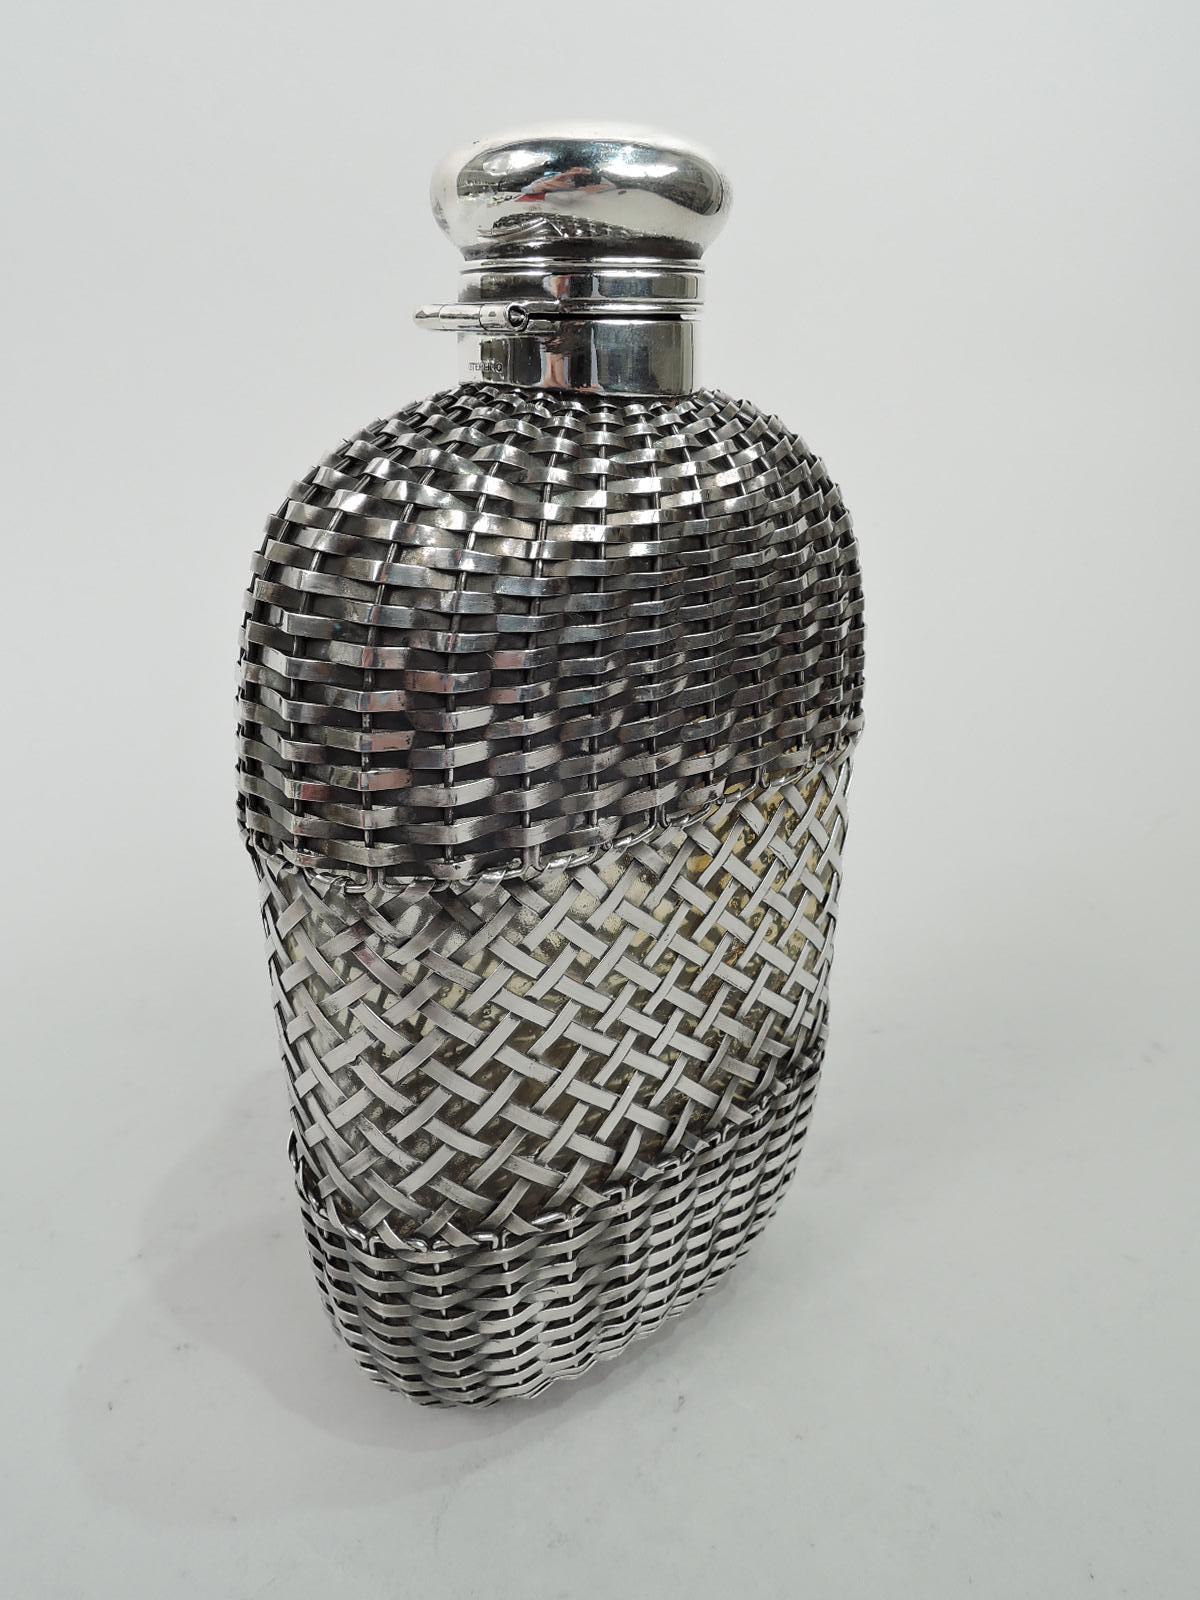 Large Edwardian flask. Made by Gorham in Providence in 1900. Rectilinear with flat front and back and curved sides in clear glass. Textural easy-grip sterling silver cage with dense weave at top and bottom and open lattice in center. Collar sterling